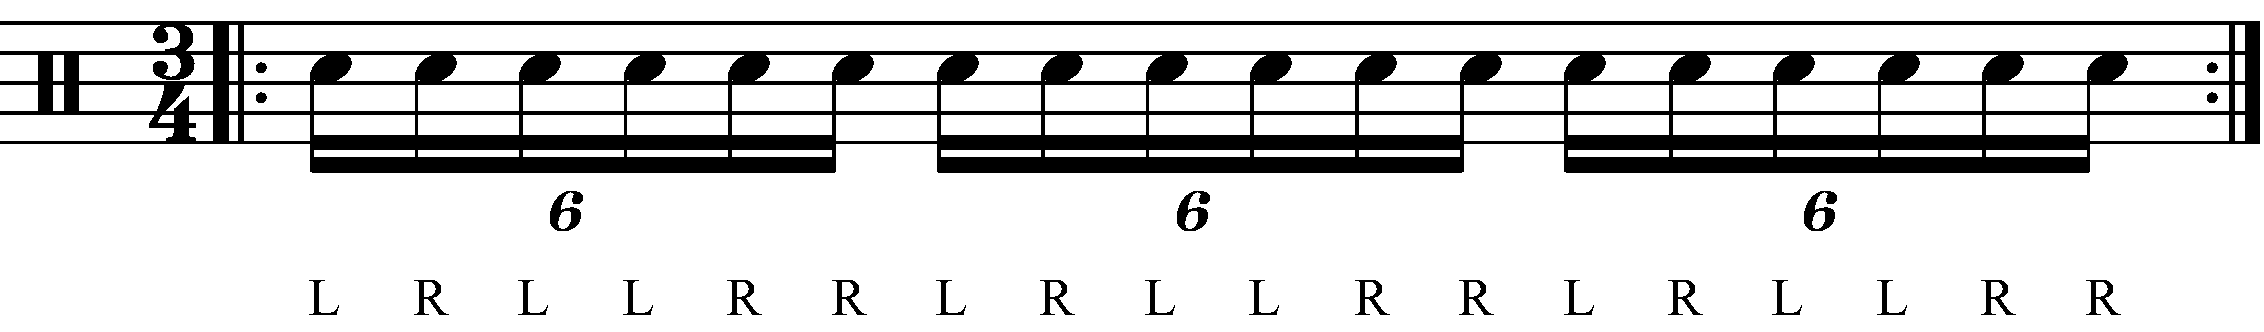 A Paradiddle diddle in 3/4 with reverse sticking